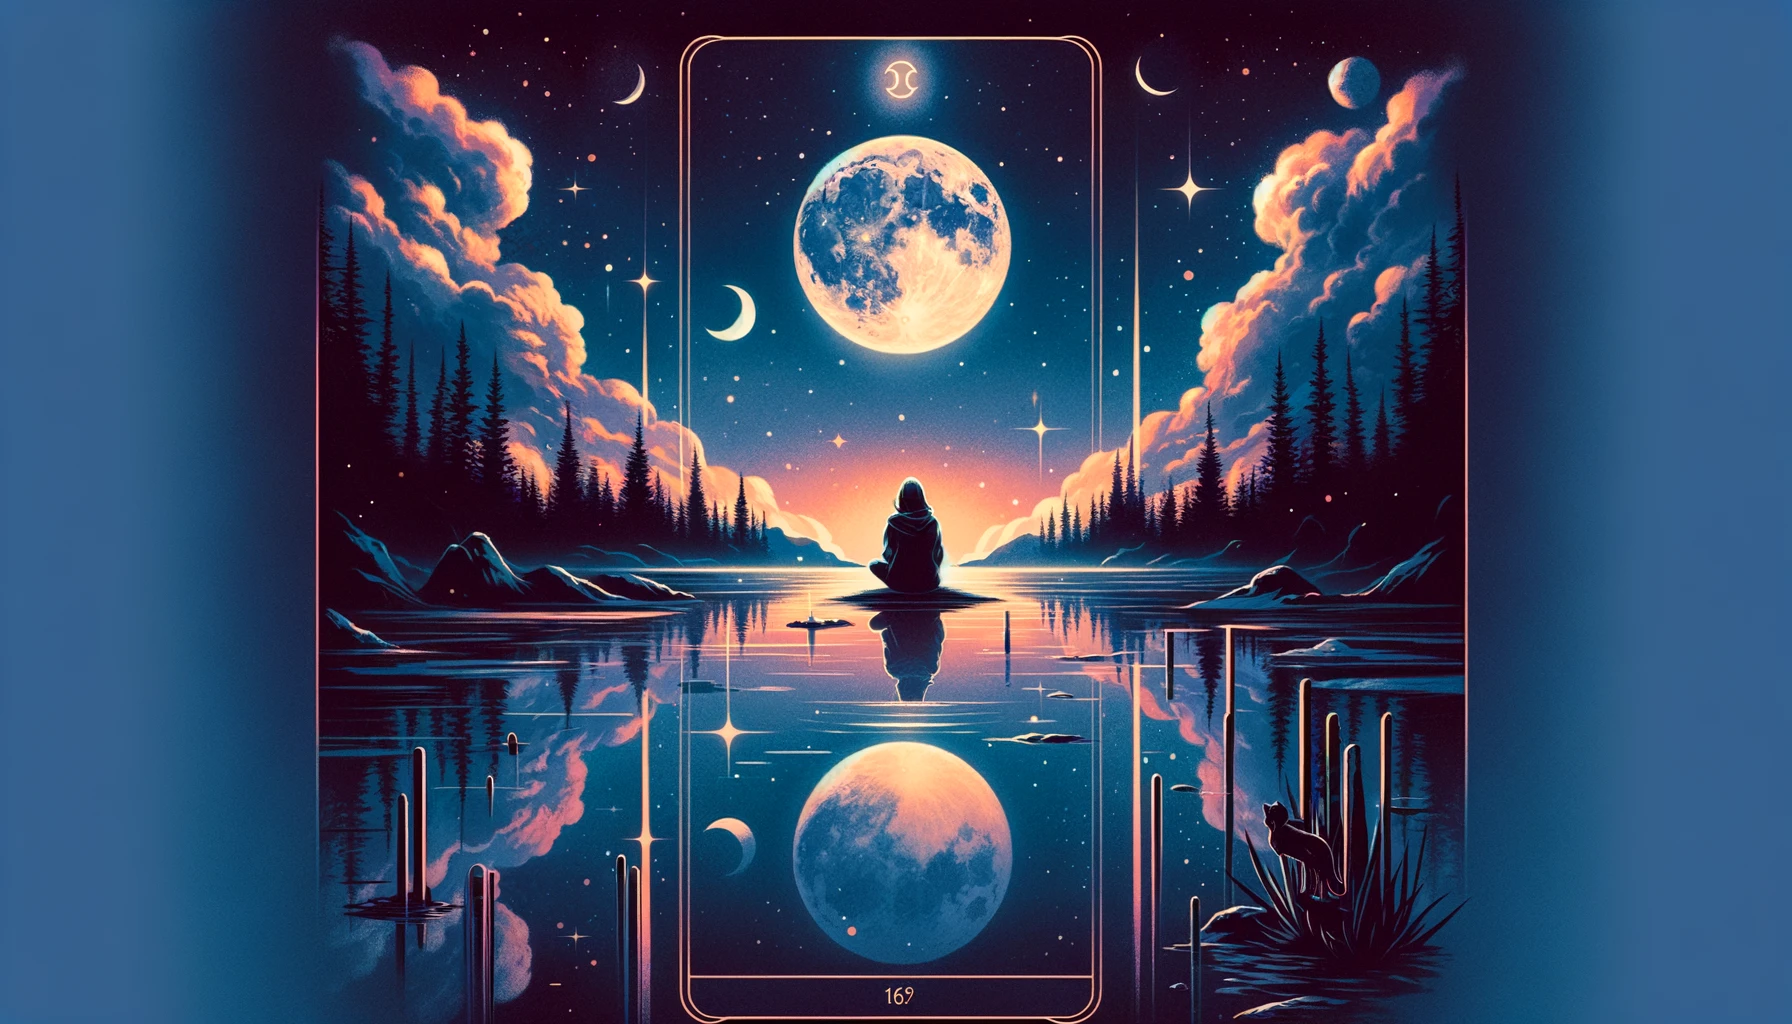 "Illustration symbolizing emotional depth, intuition, and the exploration of innermost thoughts and fears with 'The Moon' Tarot card. Sets an introspective and mysterious tone for your article discussing feelings, highlighting the quest for self-understanding."